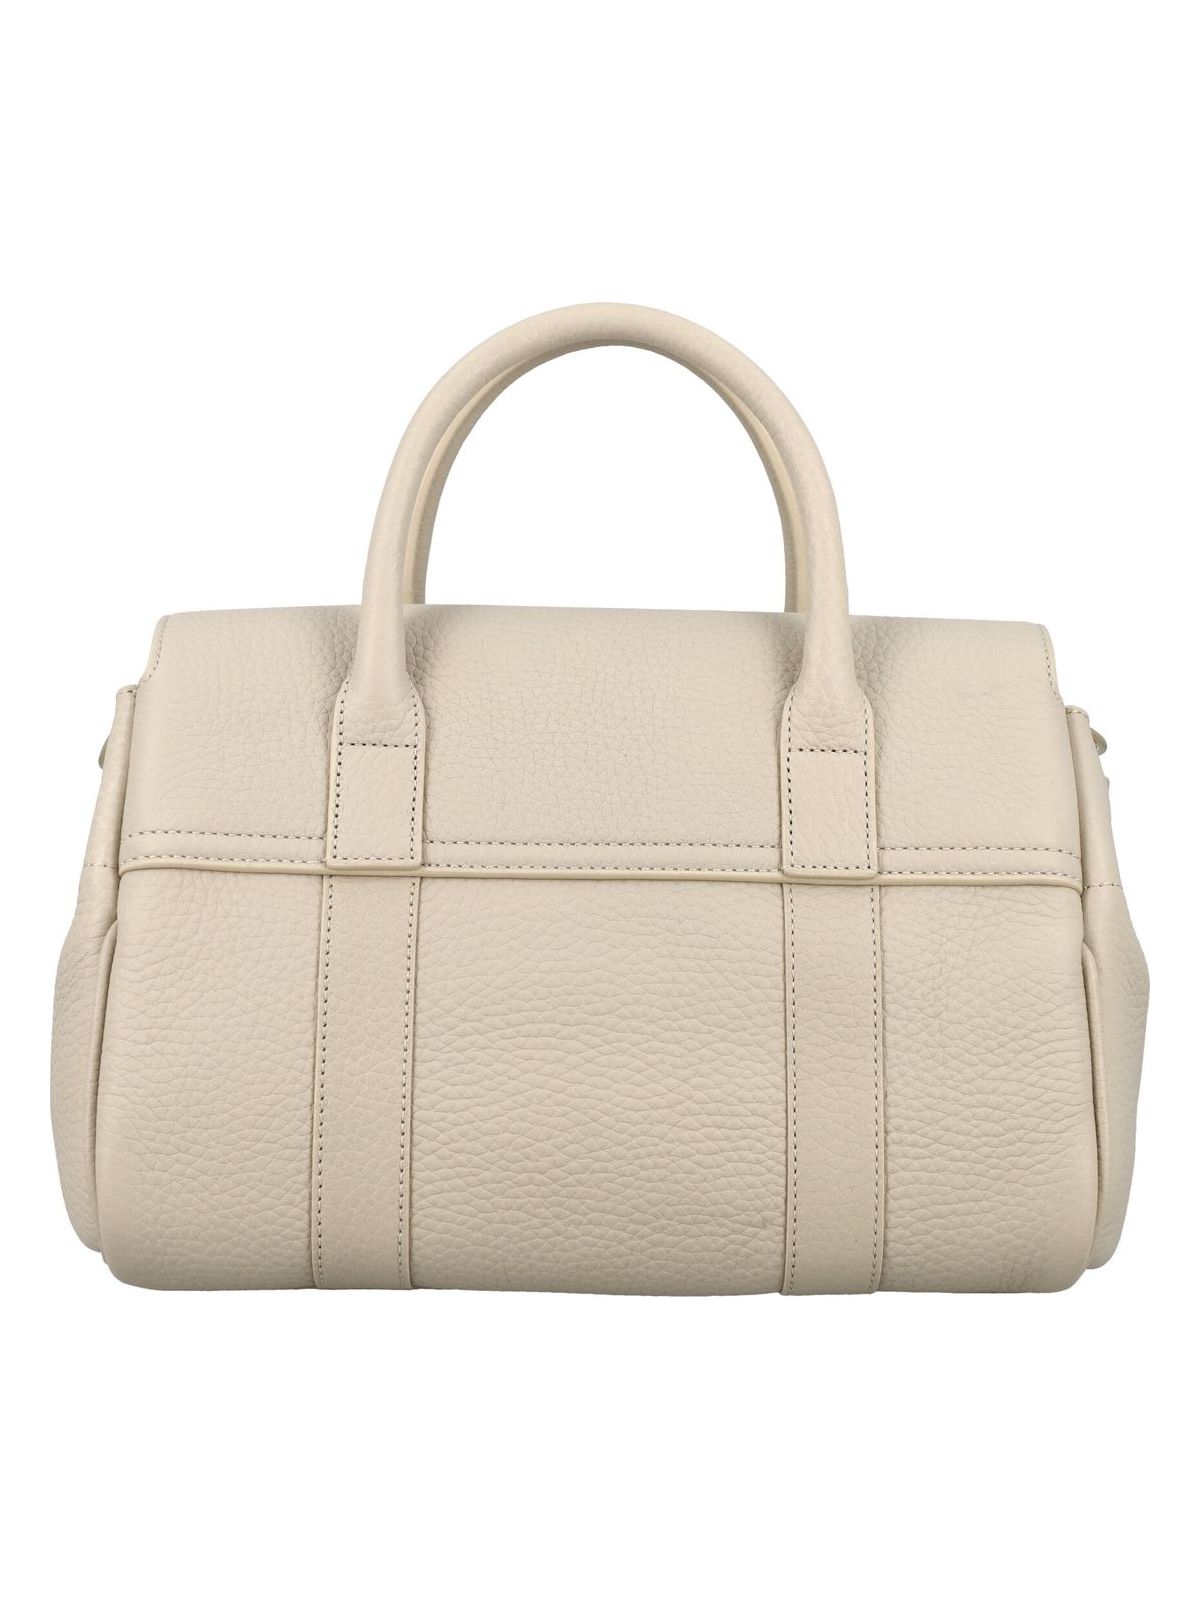 W160 MULBERRY SMALL BAYSWATER SATCHEL HG